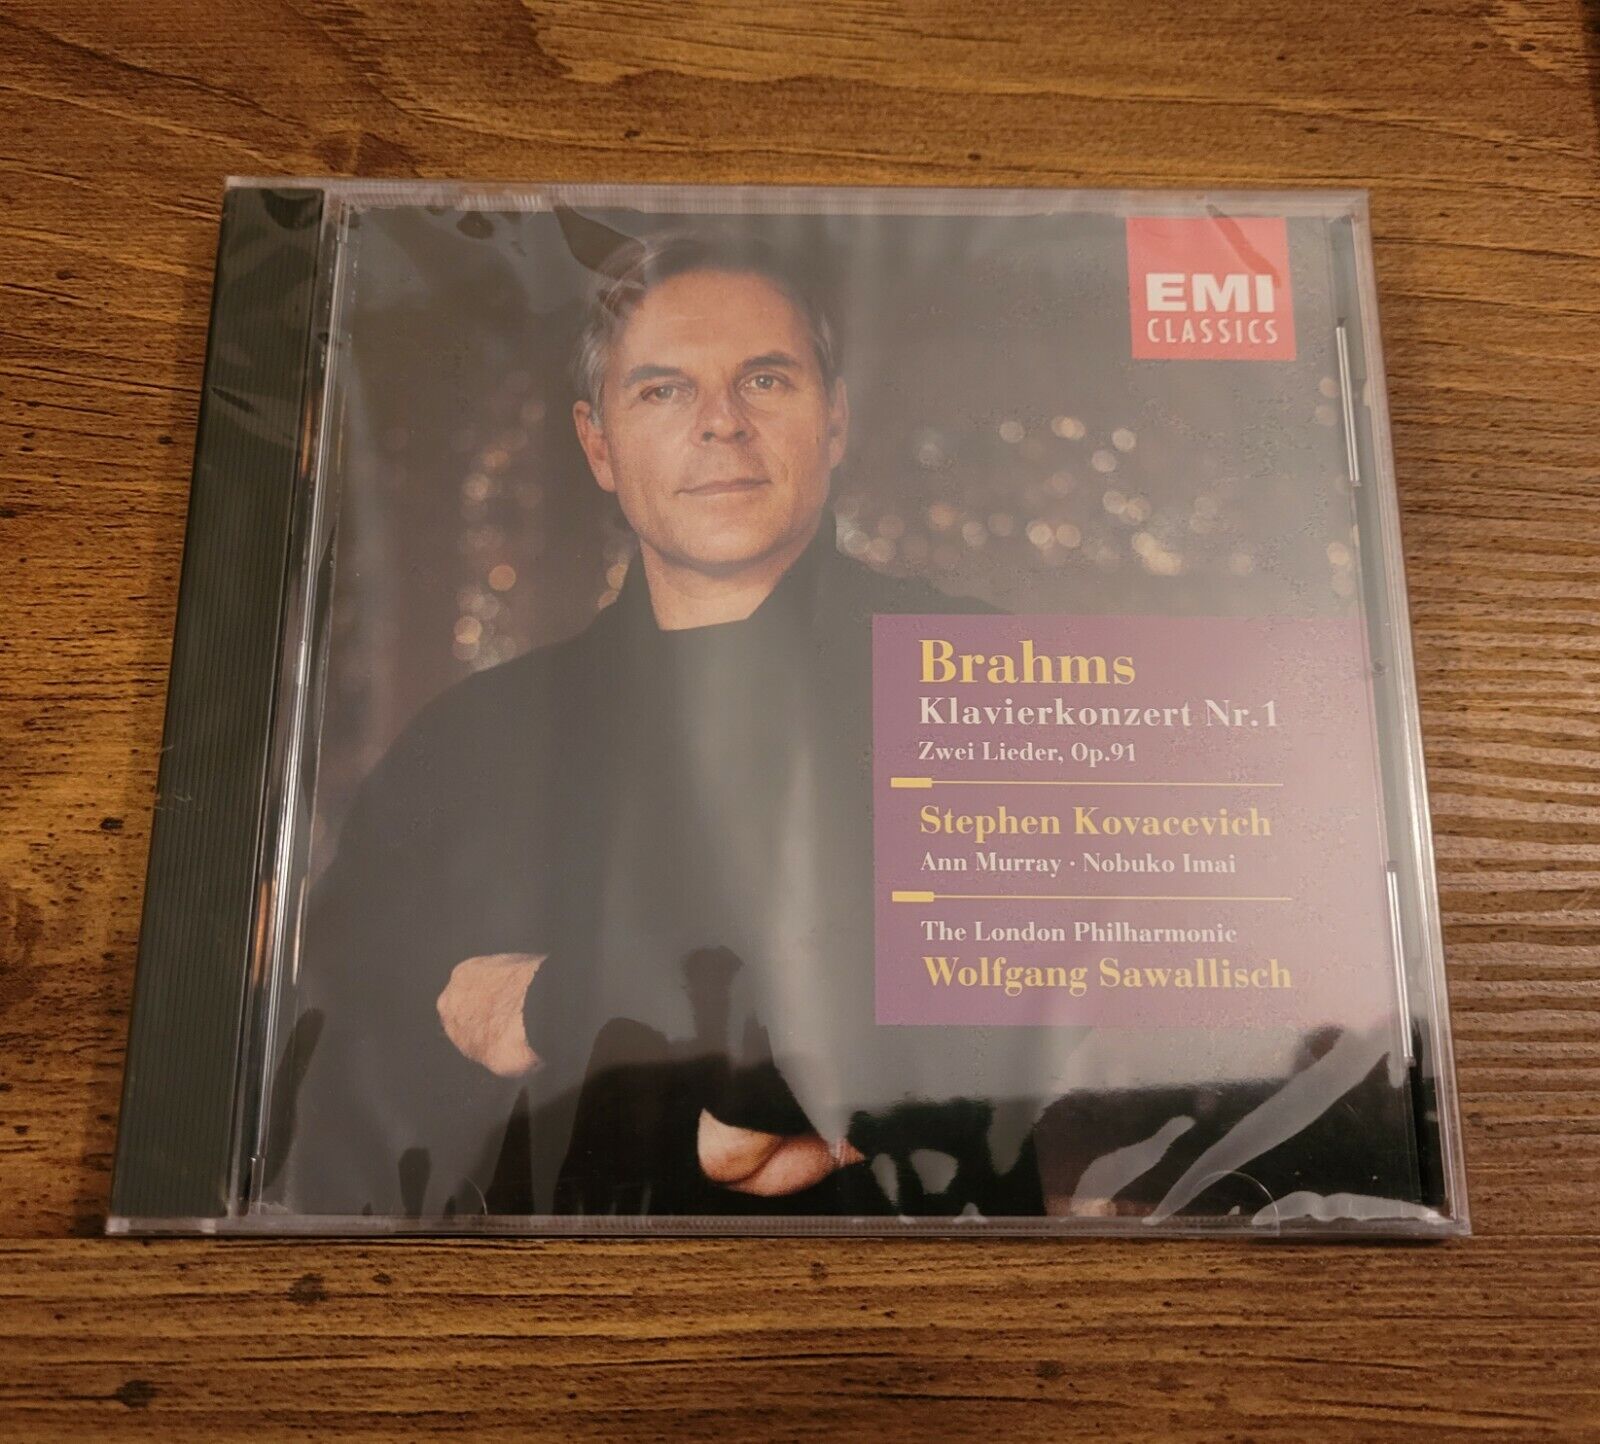 Brahms Piano Concerto 1 / Two Songs Op. 91 Music CD 1992 Brand New EMI Classics